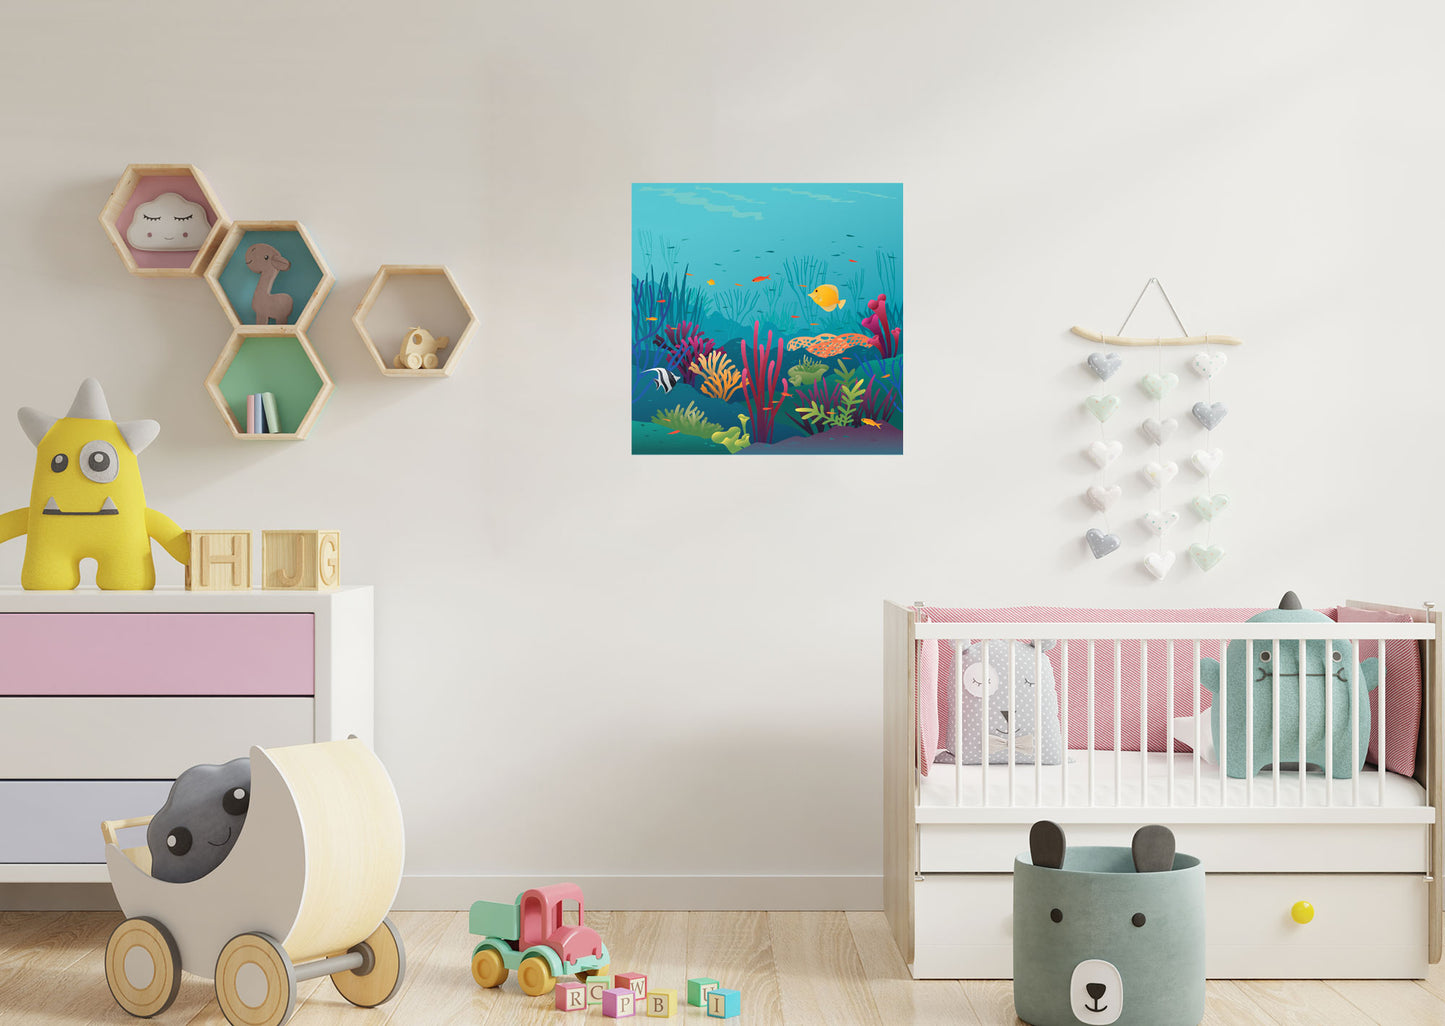 Nursery:  Colorful Ocean Mural        -   Removable Wall   Adhesive Decal